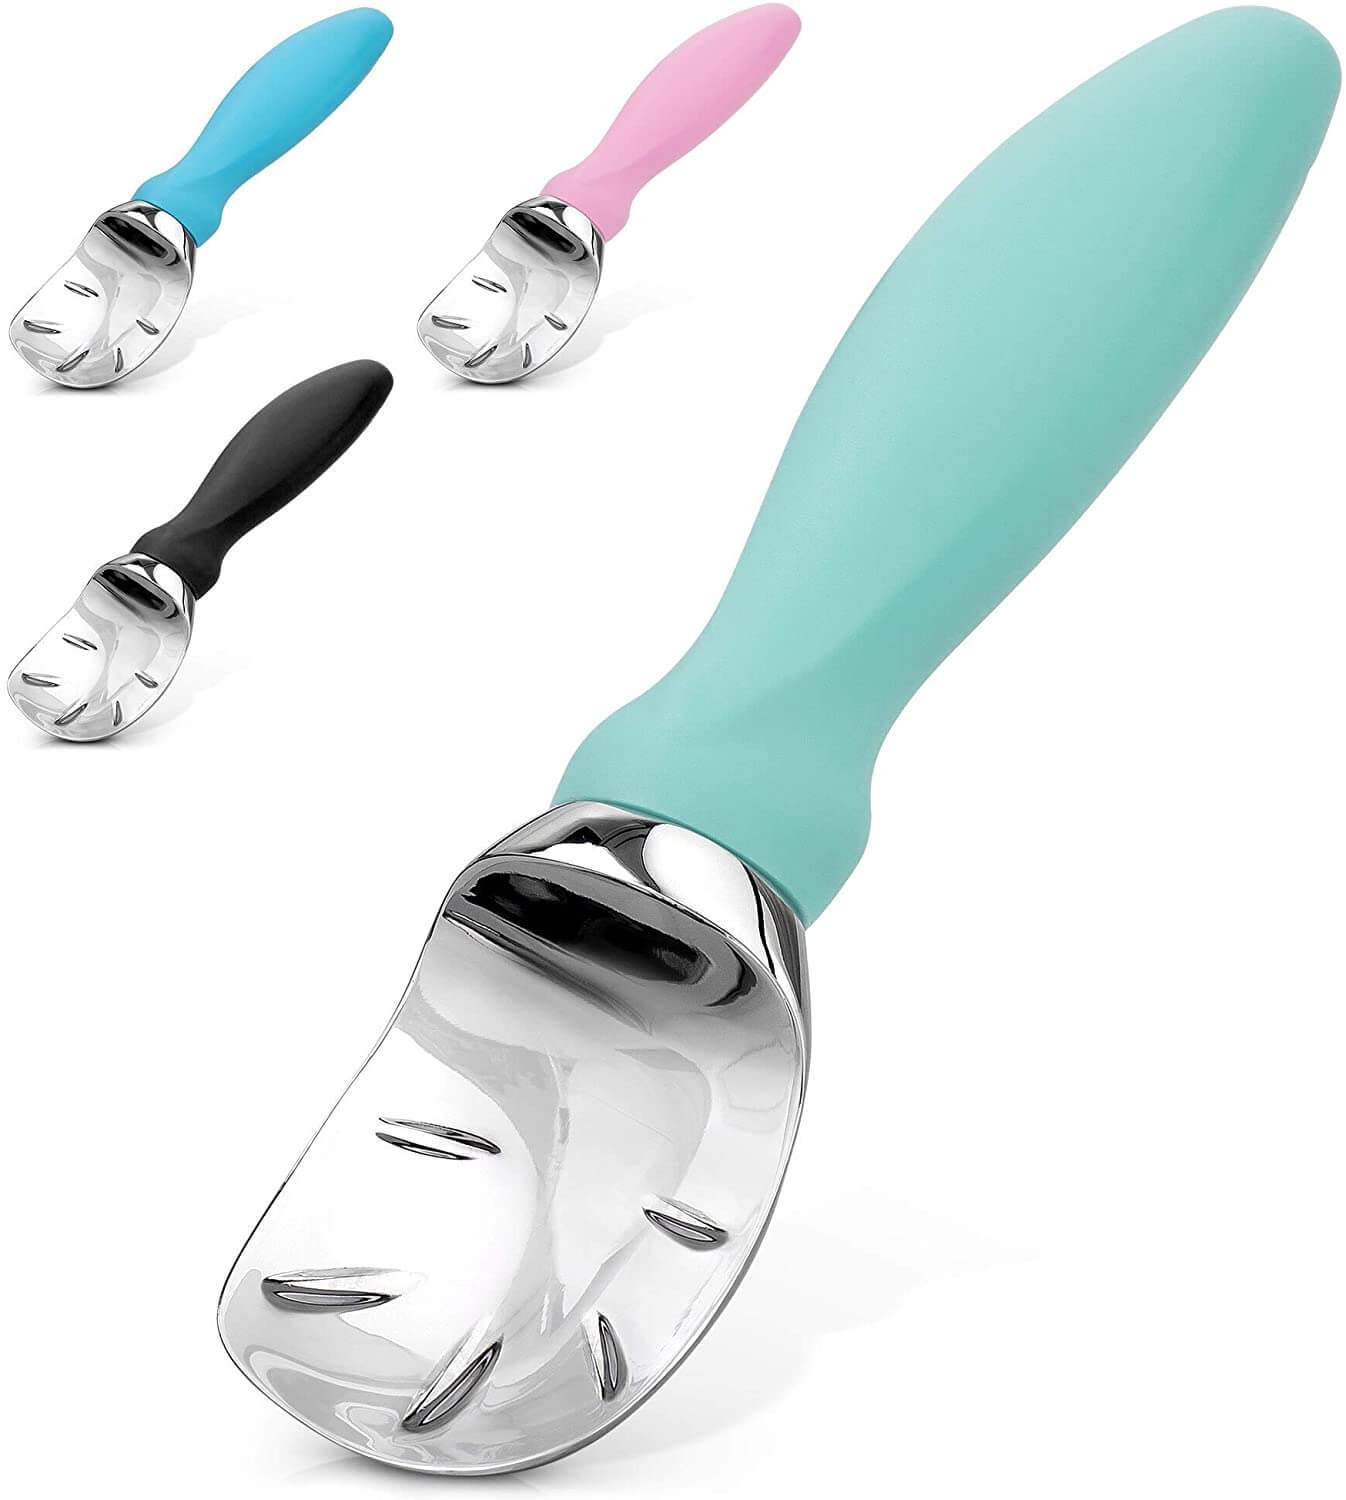 Zulay Kitchen Ice Cream Scooper with Built-in Lid Opener - Pink